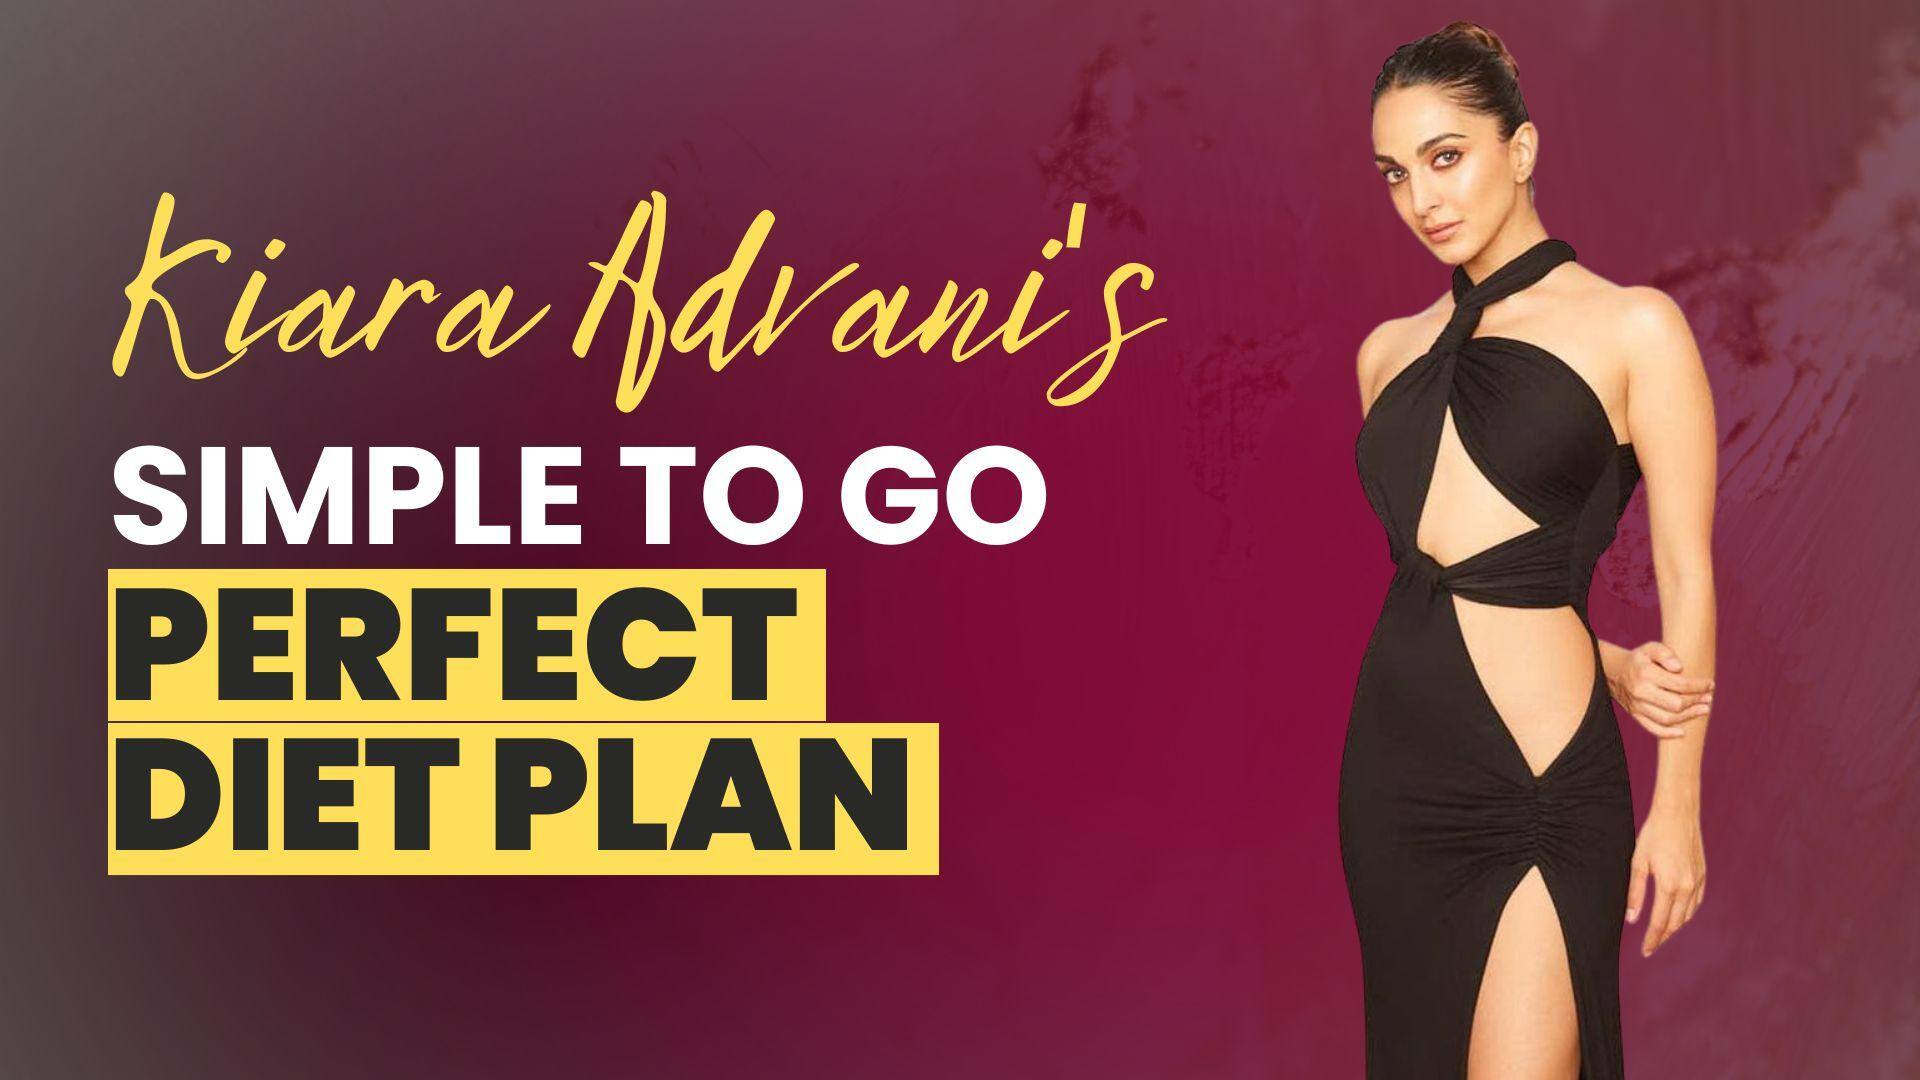 REVEALED! Kiara Advani's Diet to Have a Hot Body | TheHealthSite.com